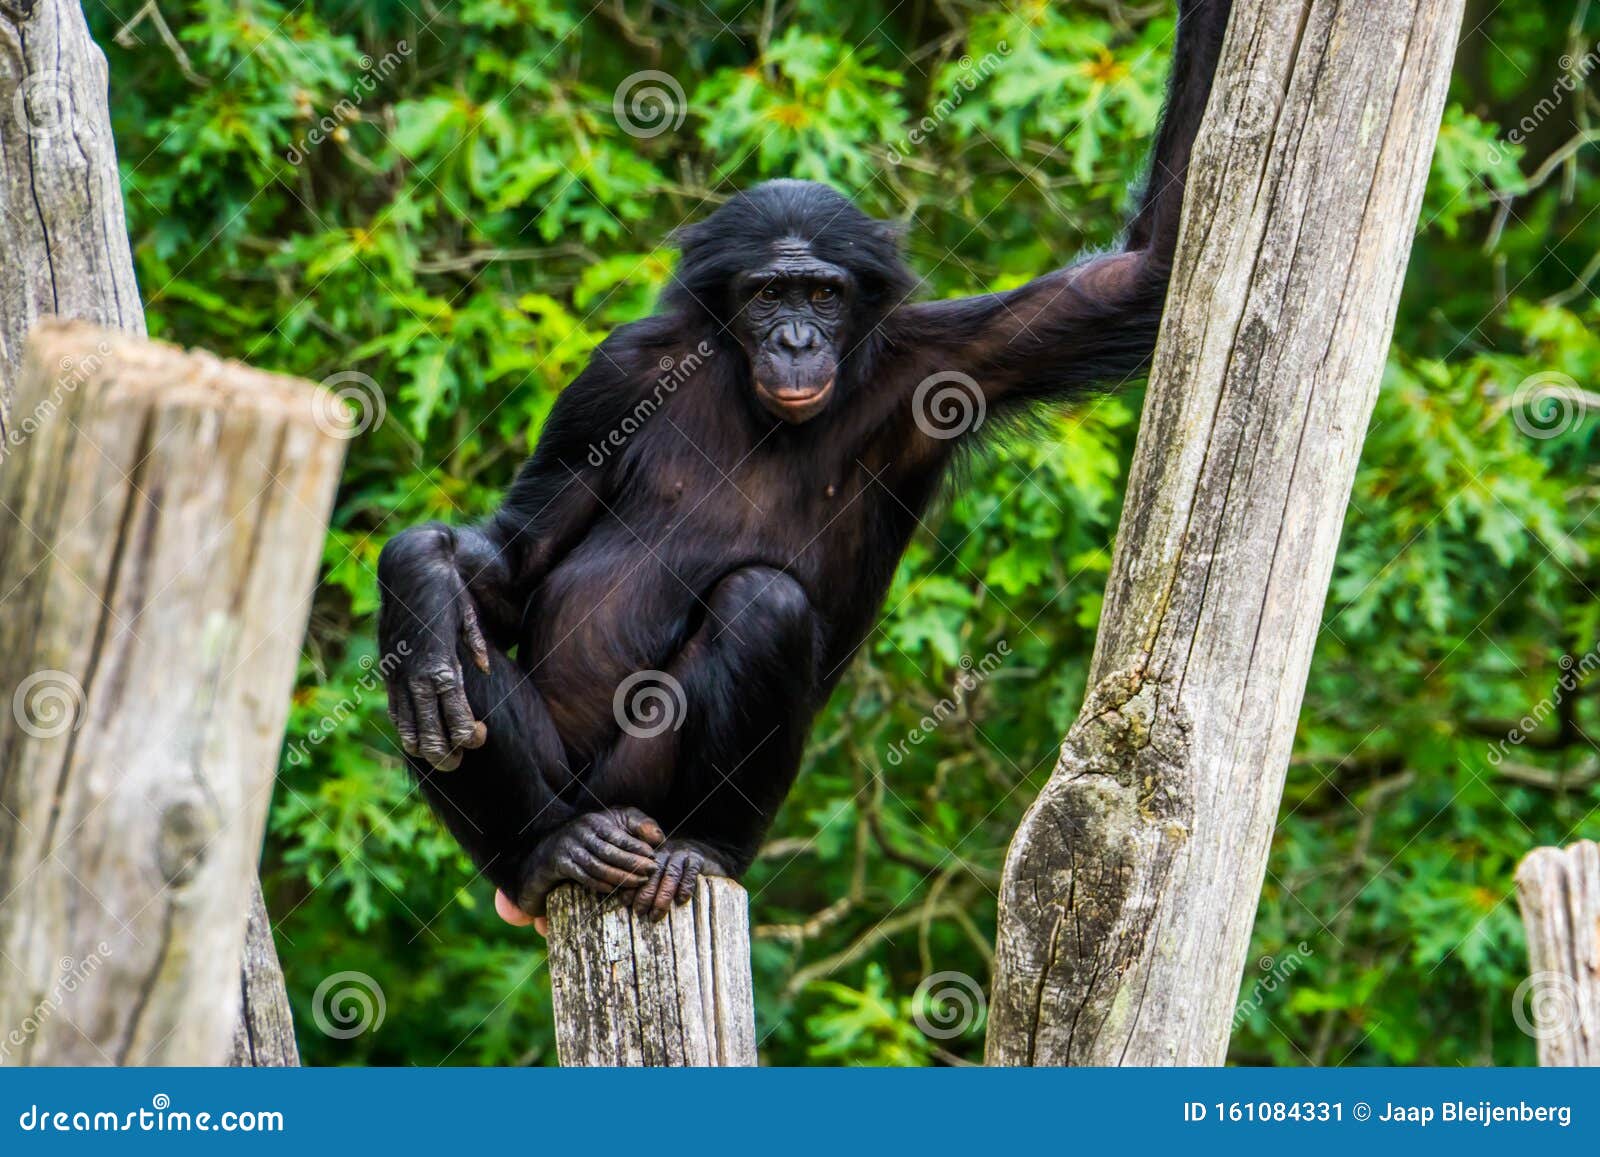 Funny Bonobo Standing in a Seductive Pose, Pygmy Chimpanzee, Human Ape,  Endangered Primate Specie from Africa Stock Image - Image of beautiful,  dwarf: 161084331